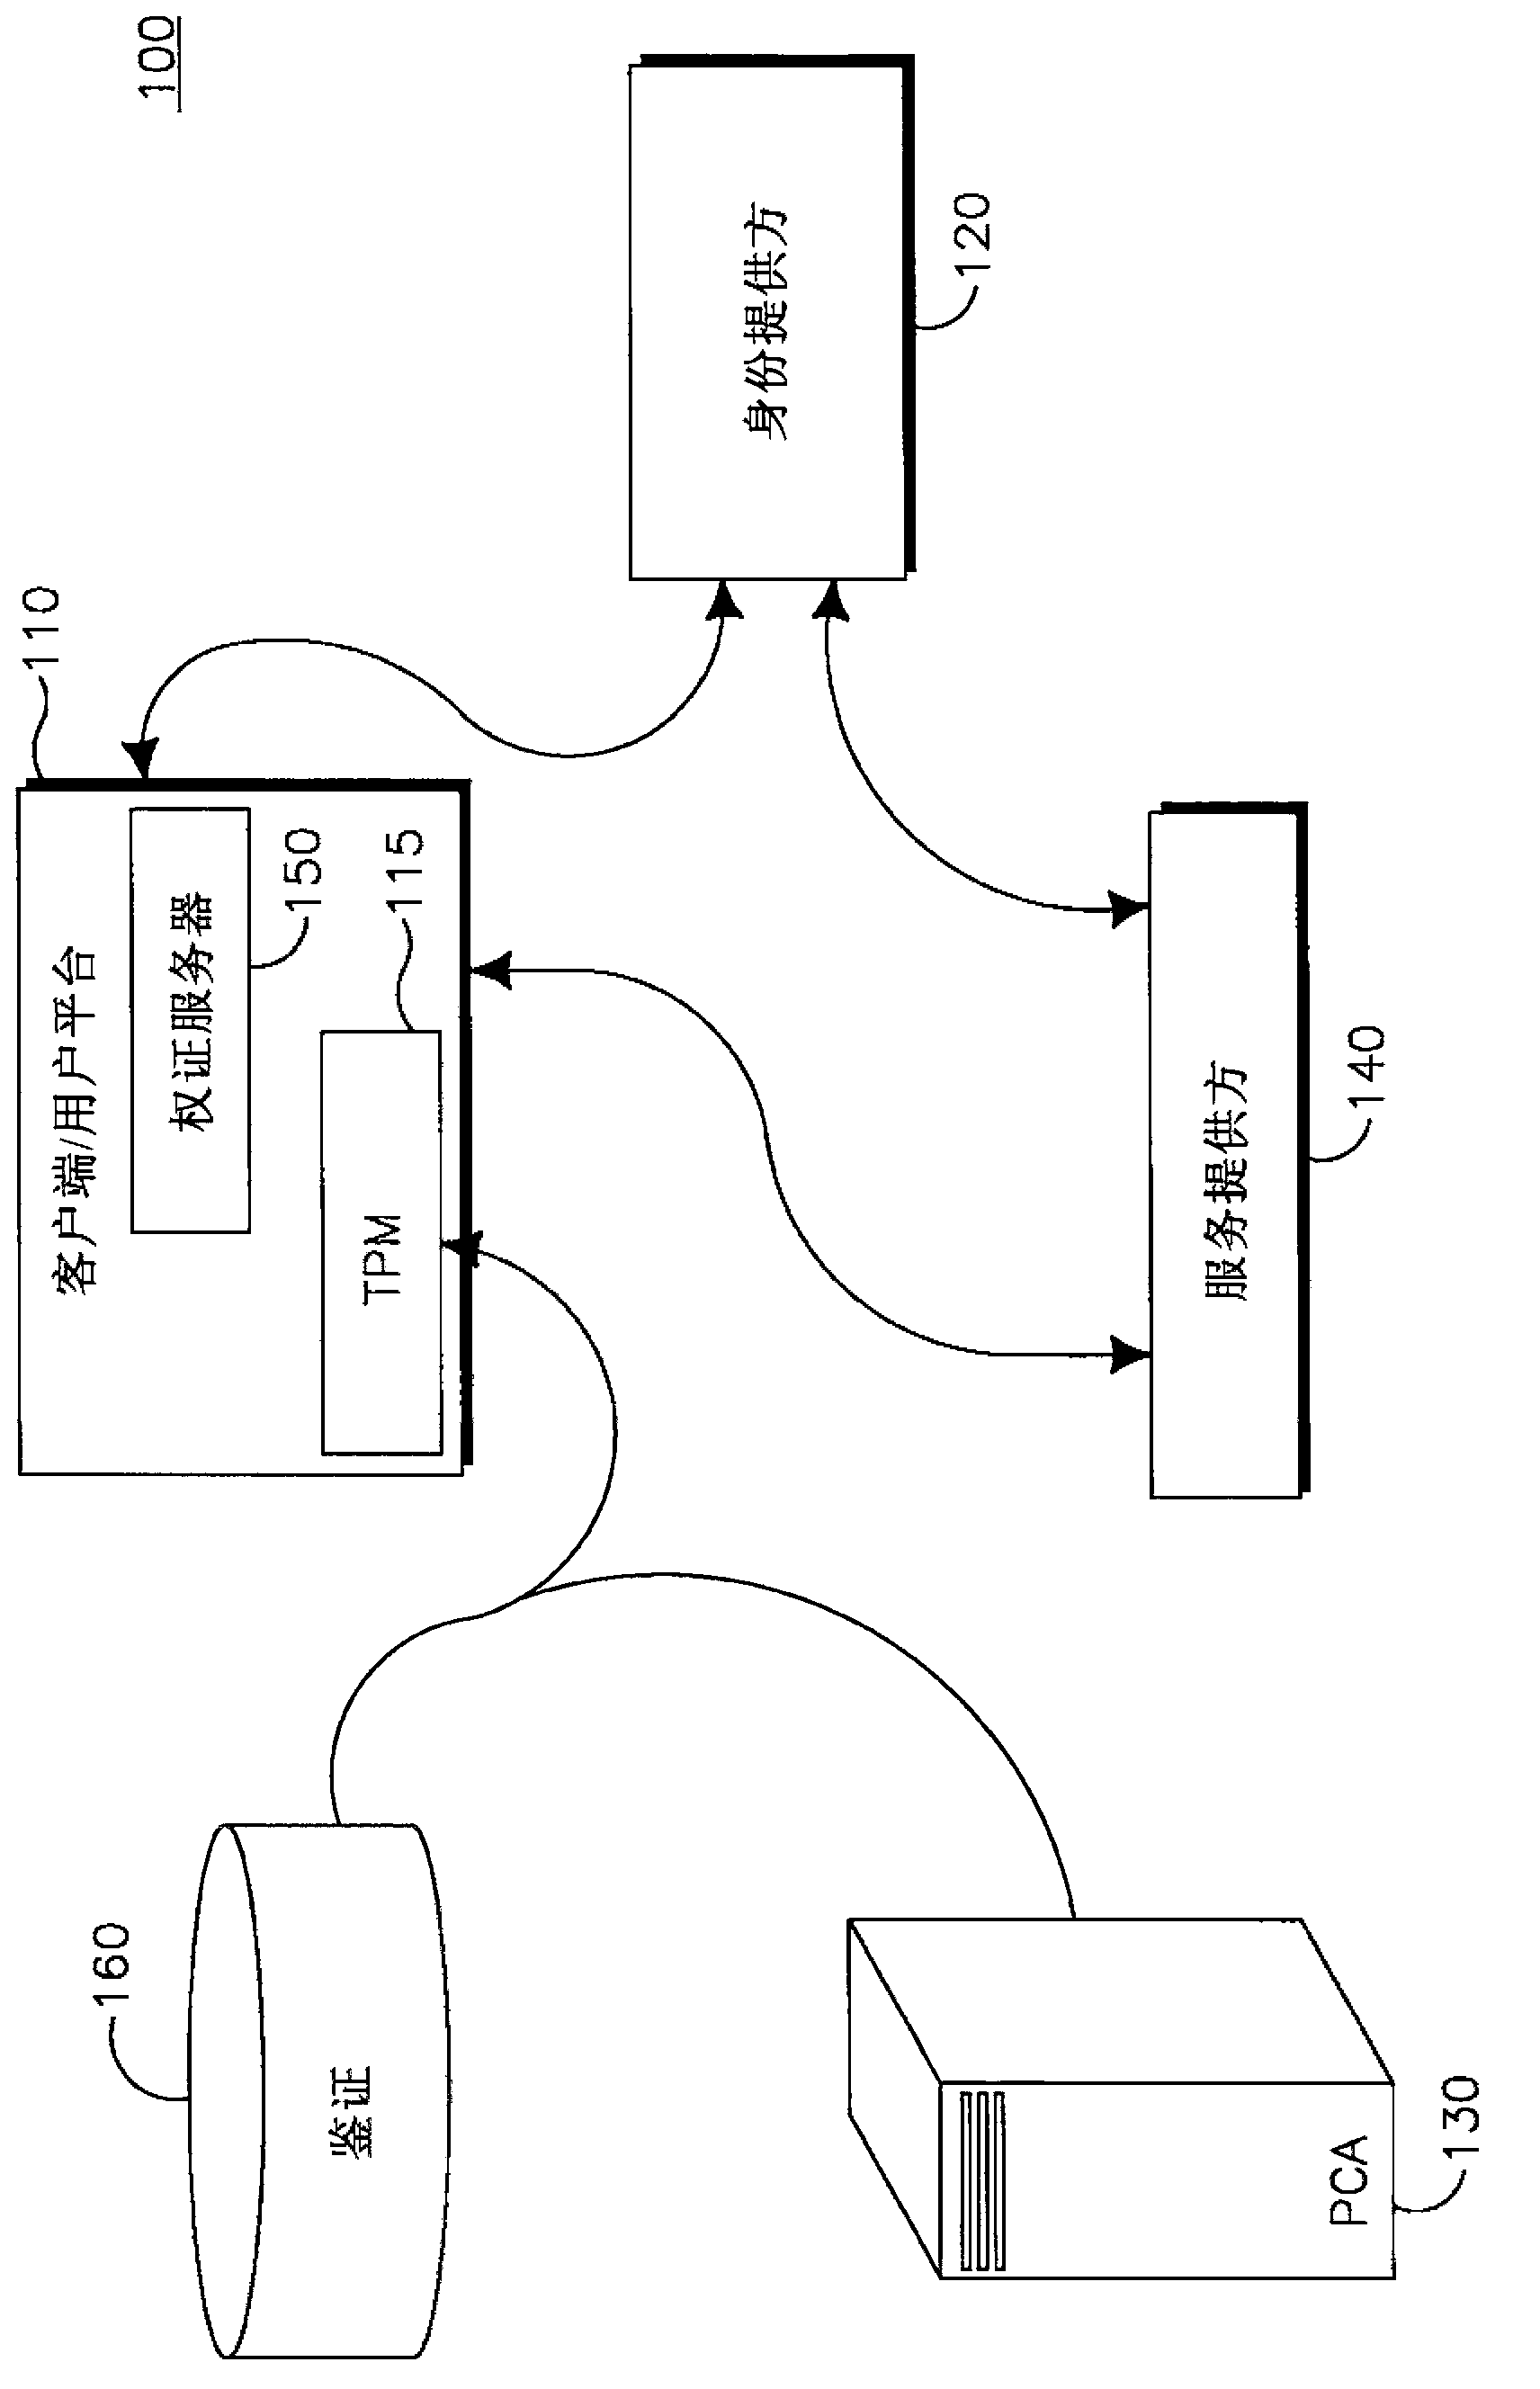 Method and apparatus for trusted federated identity management and data access authorization